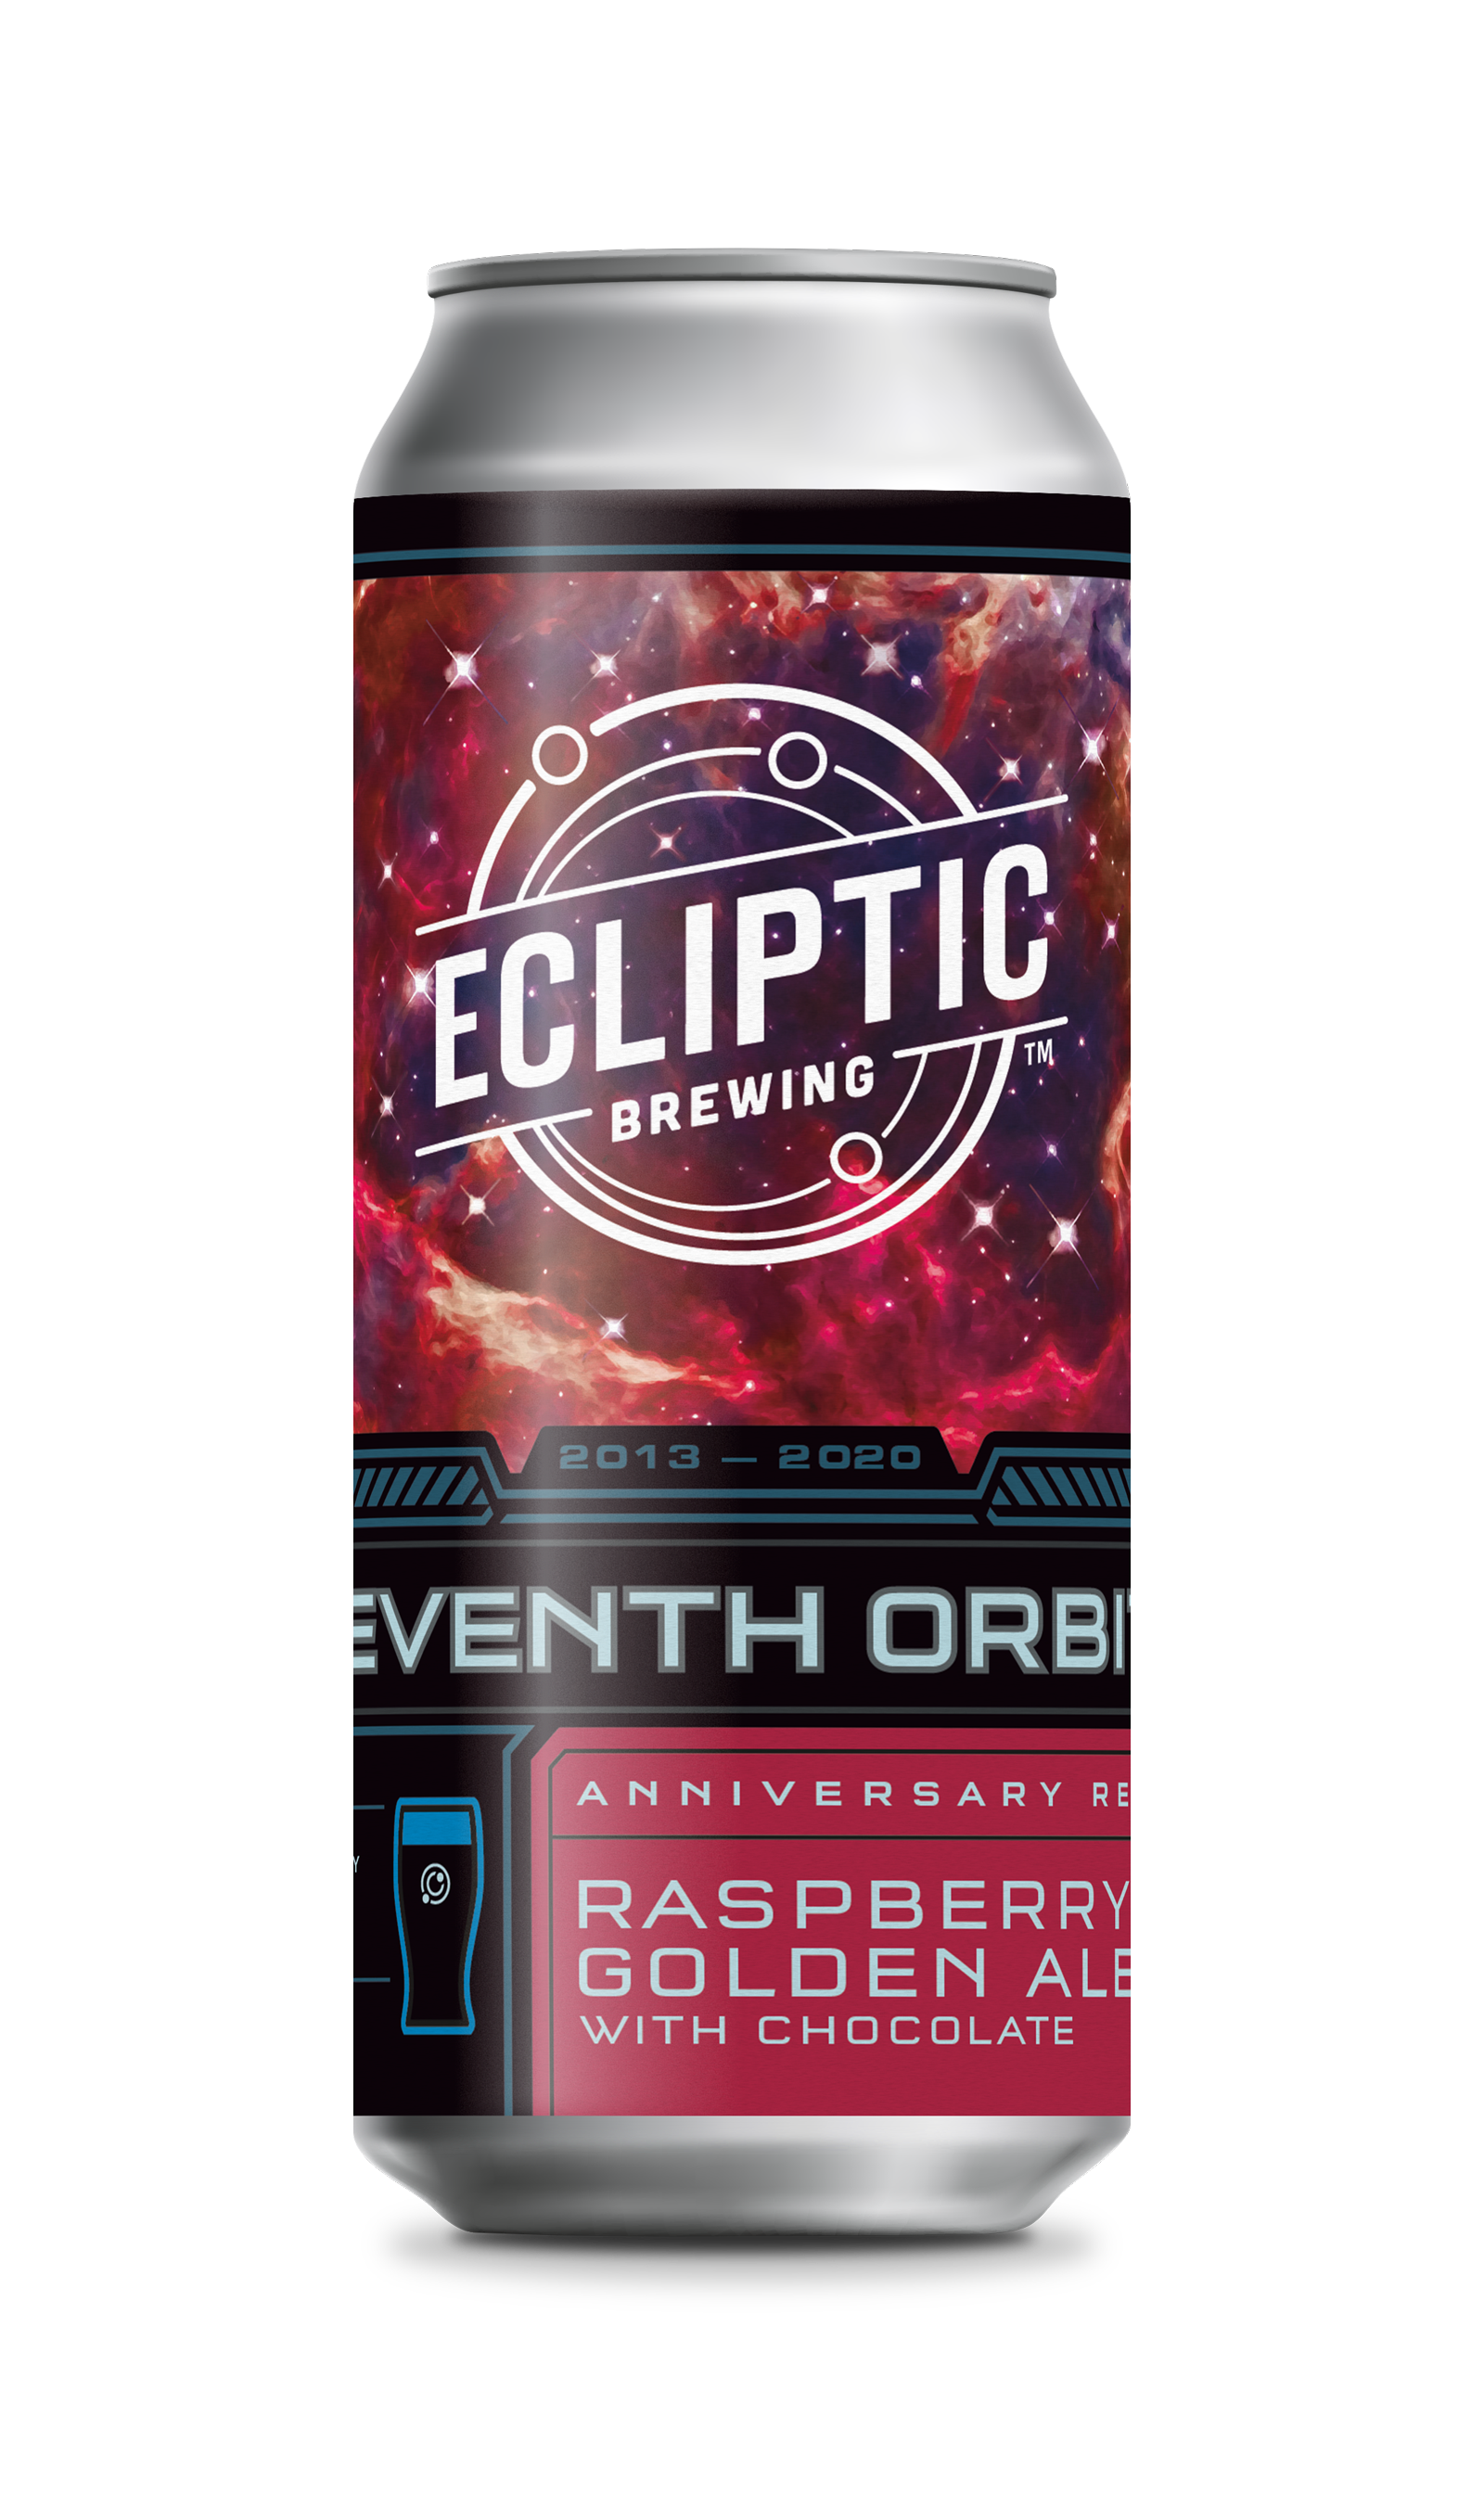 Ecliptic Brewing Seventh Orbit Raspberry Golden Ale with Chocolate Bottle